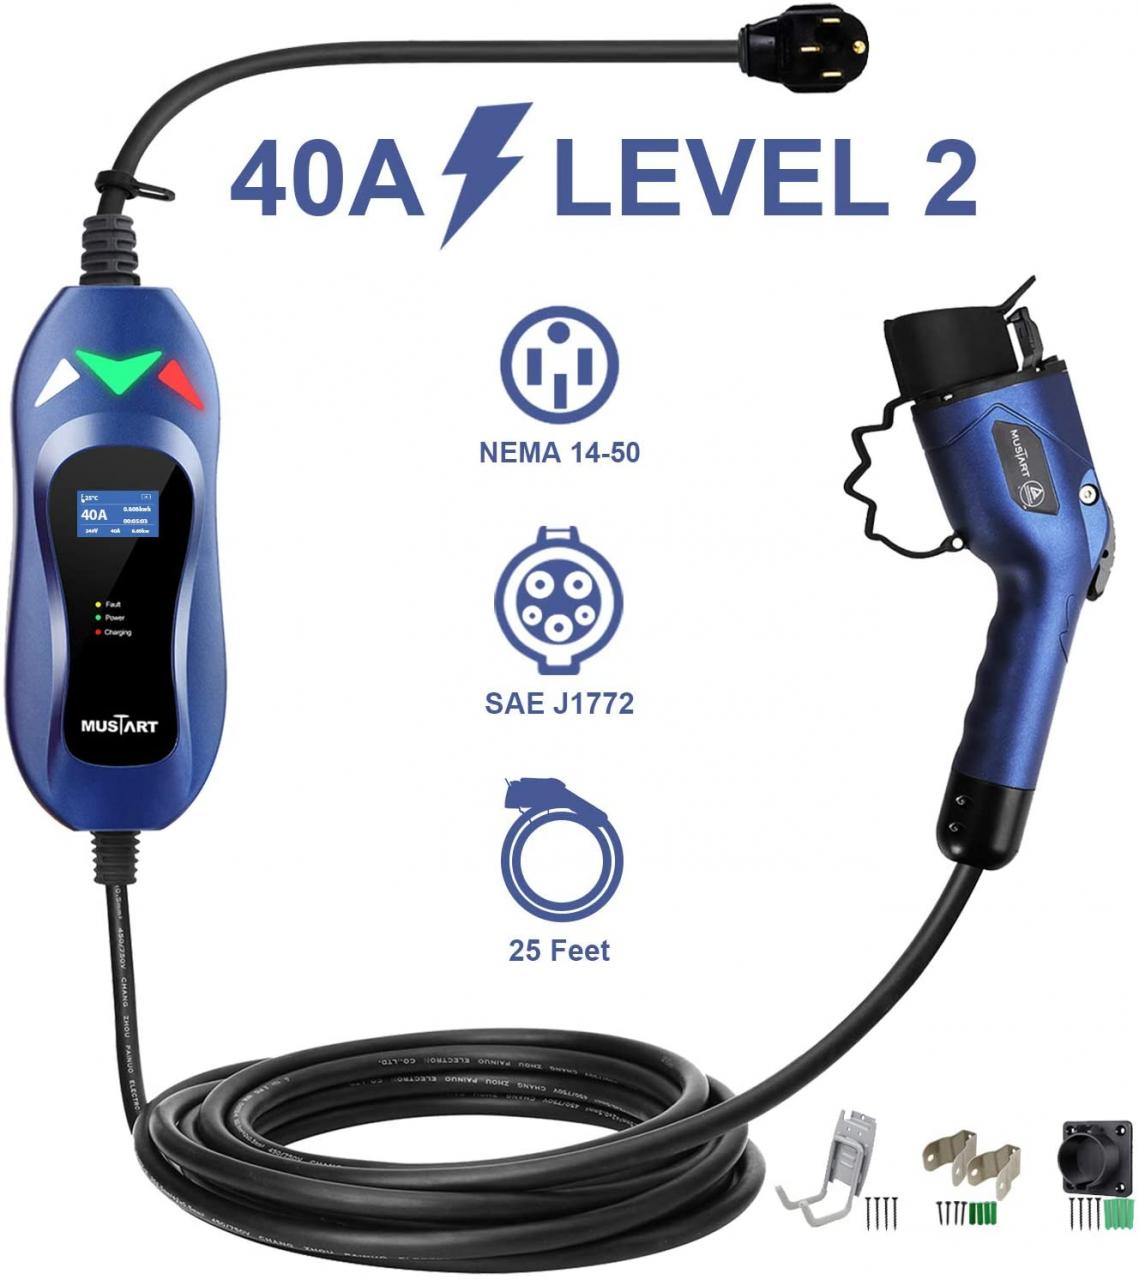 Buy MUSTART Level 2 Portable EV Charger (240 Volt, 25ft Cable, 40 Amp), Electric  Vehicle Charger Plug-in EV Charging Station with NEMA 14-50P (Update  Version) Online in Hong Kong. B07THBGGMG